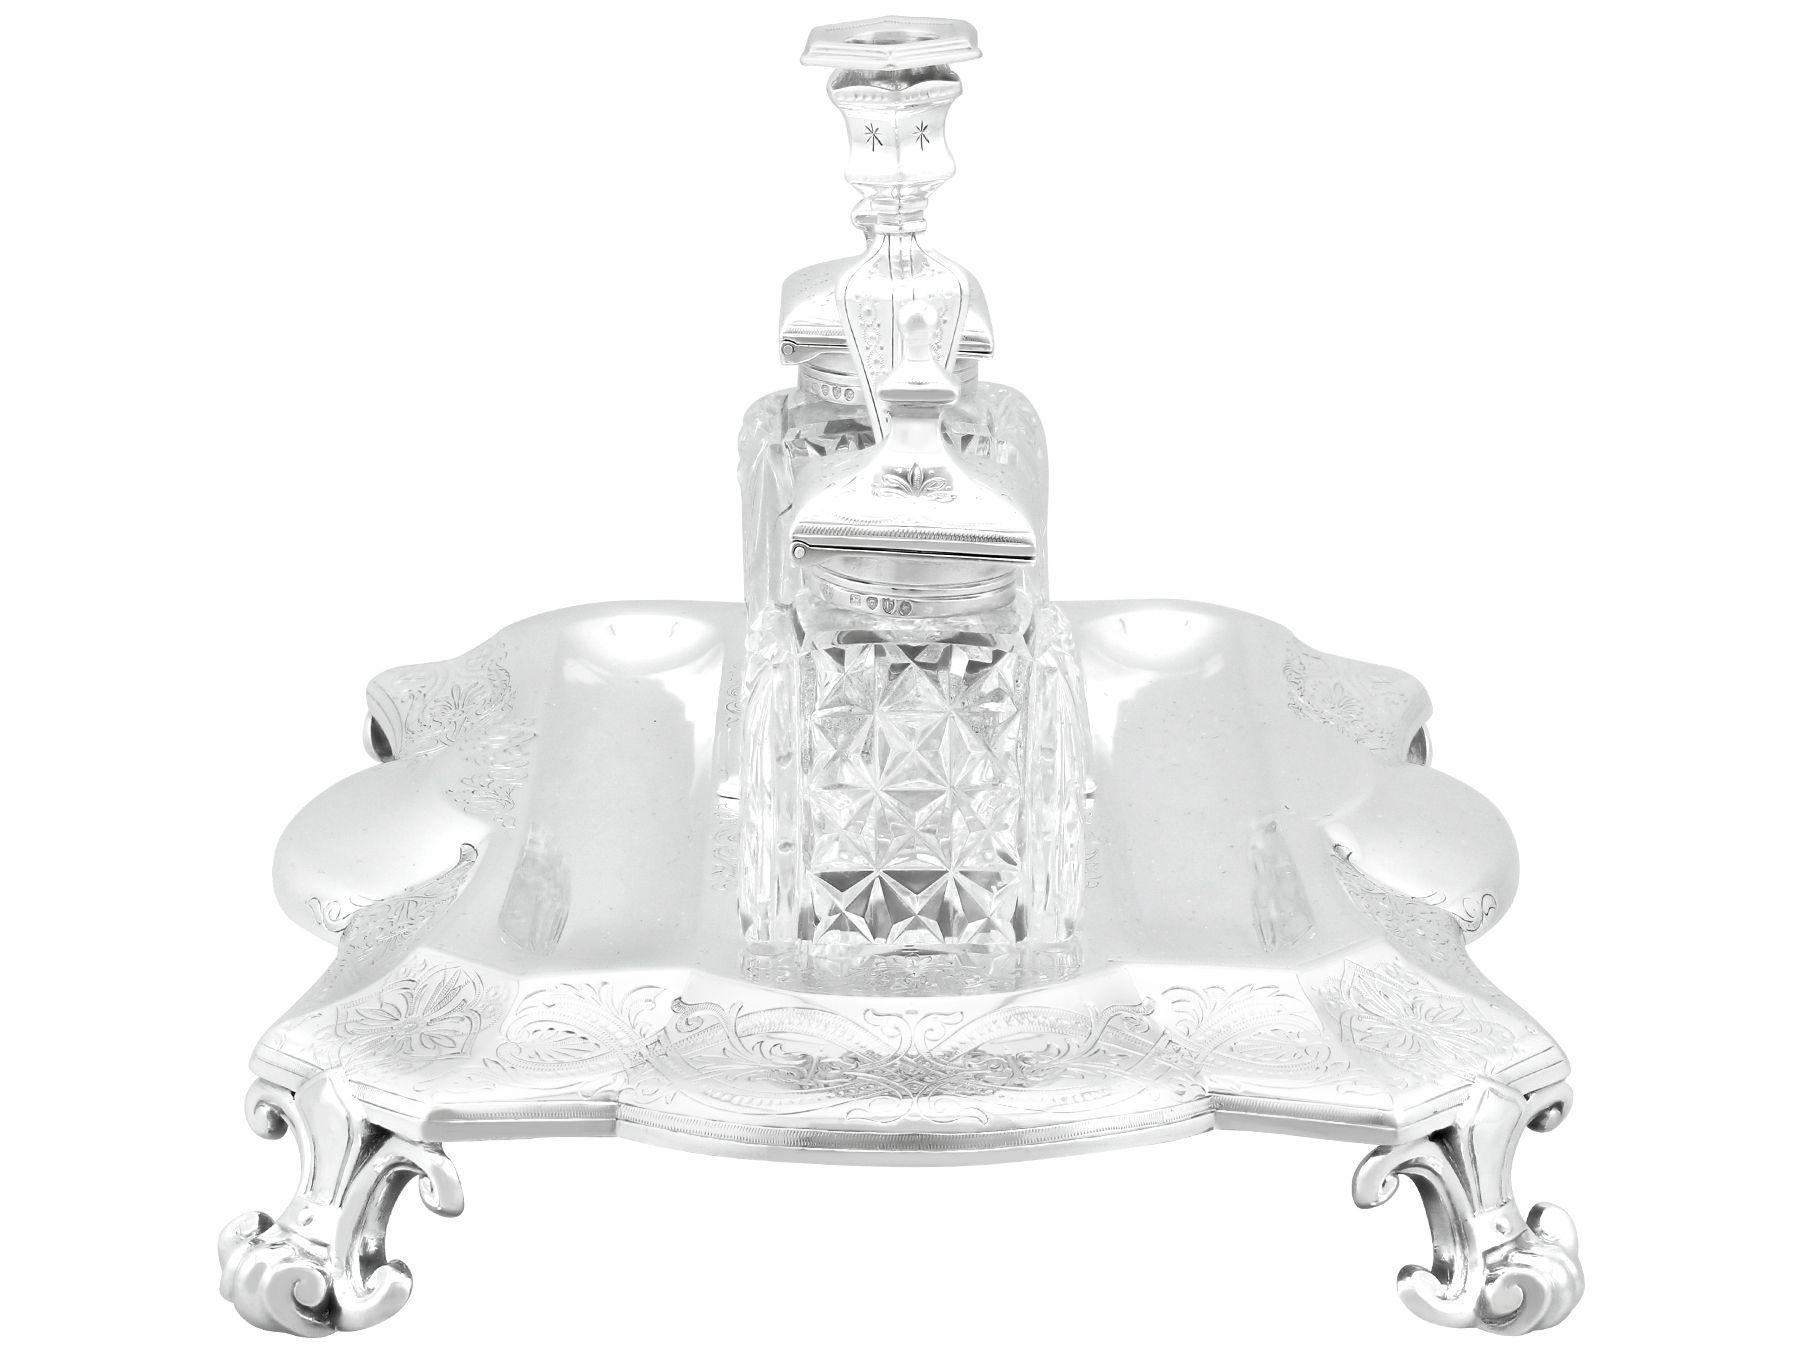 An exceptional, fine and impressive antique Victorian English sterling silver and glass inkstand / desk standish; an addition to our ornamental silverware collection

This magnificent, fine and impressive antique Victorian silver inkstand / desk